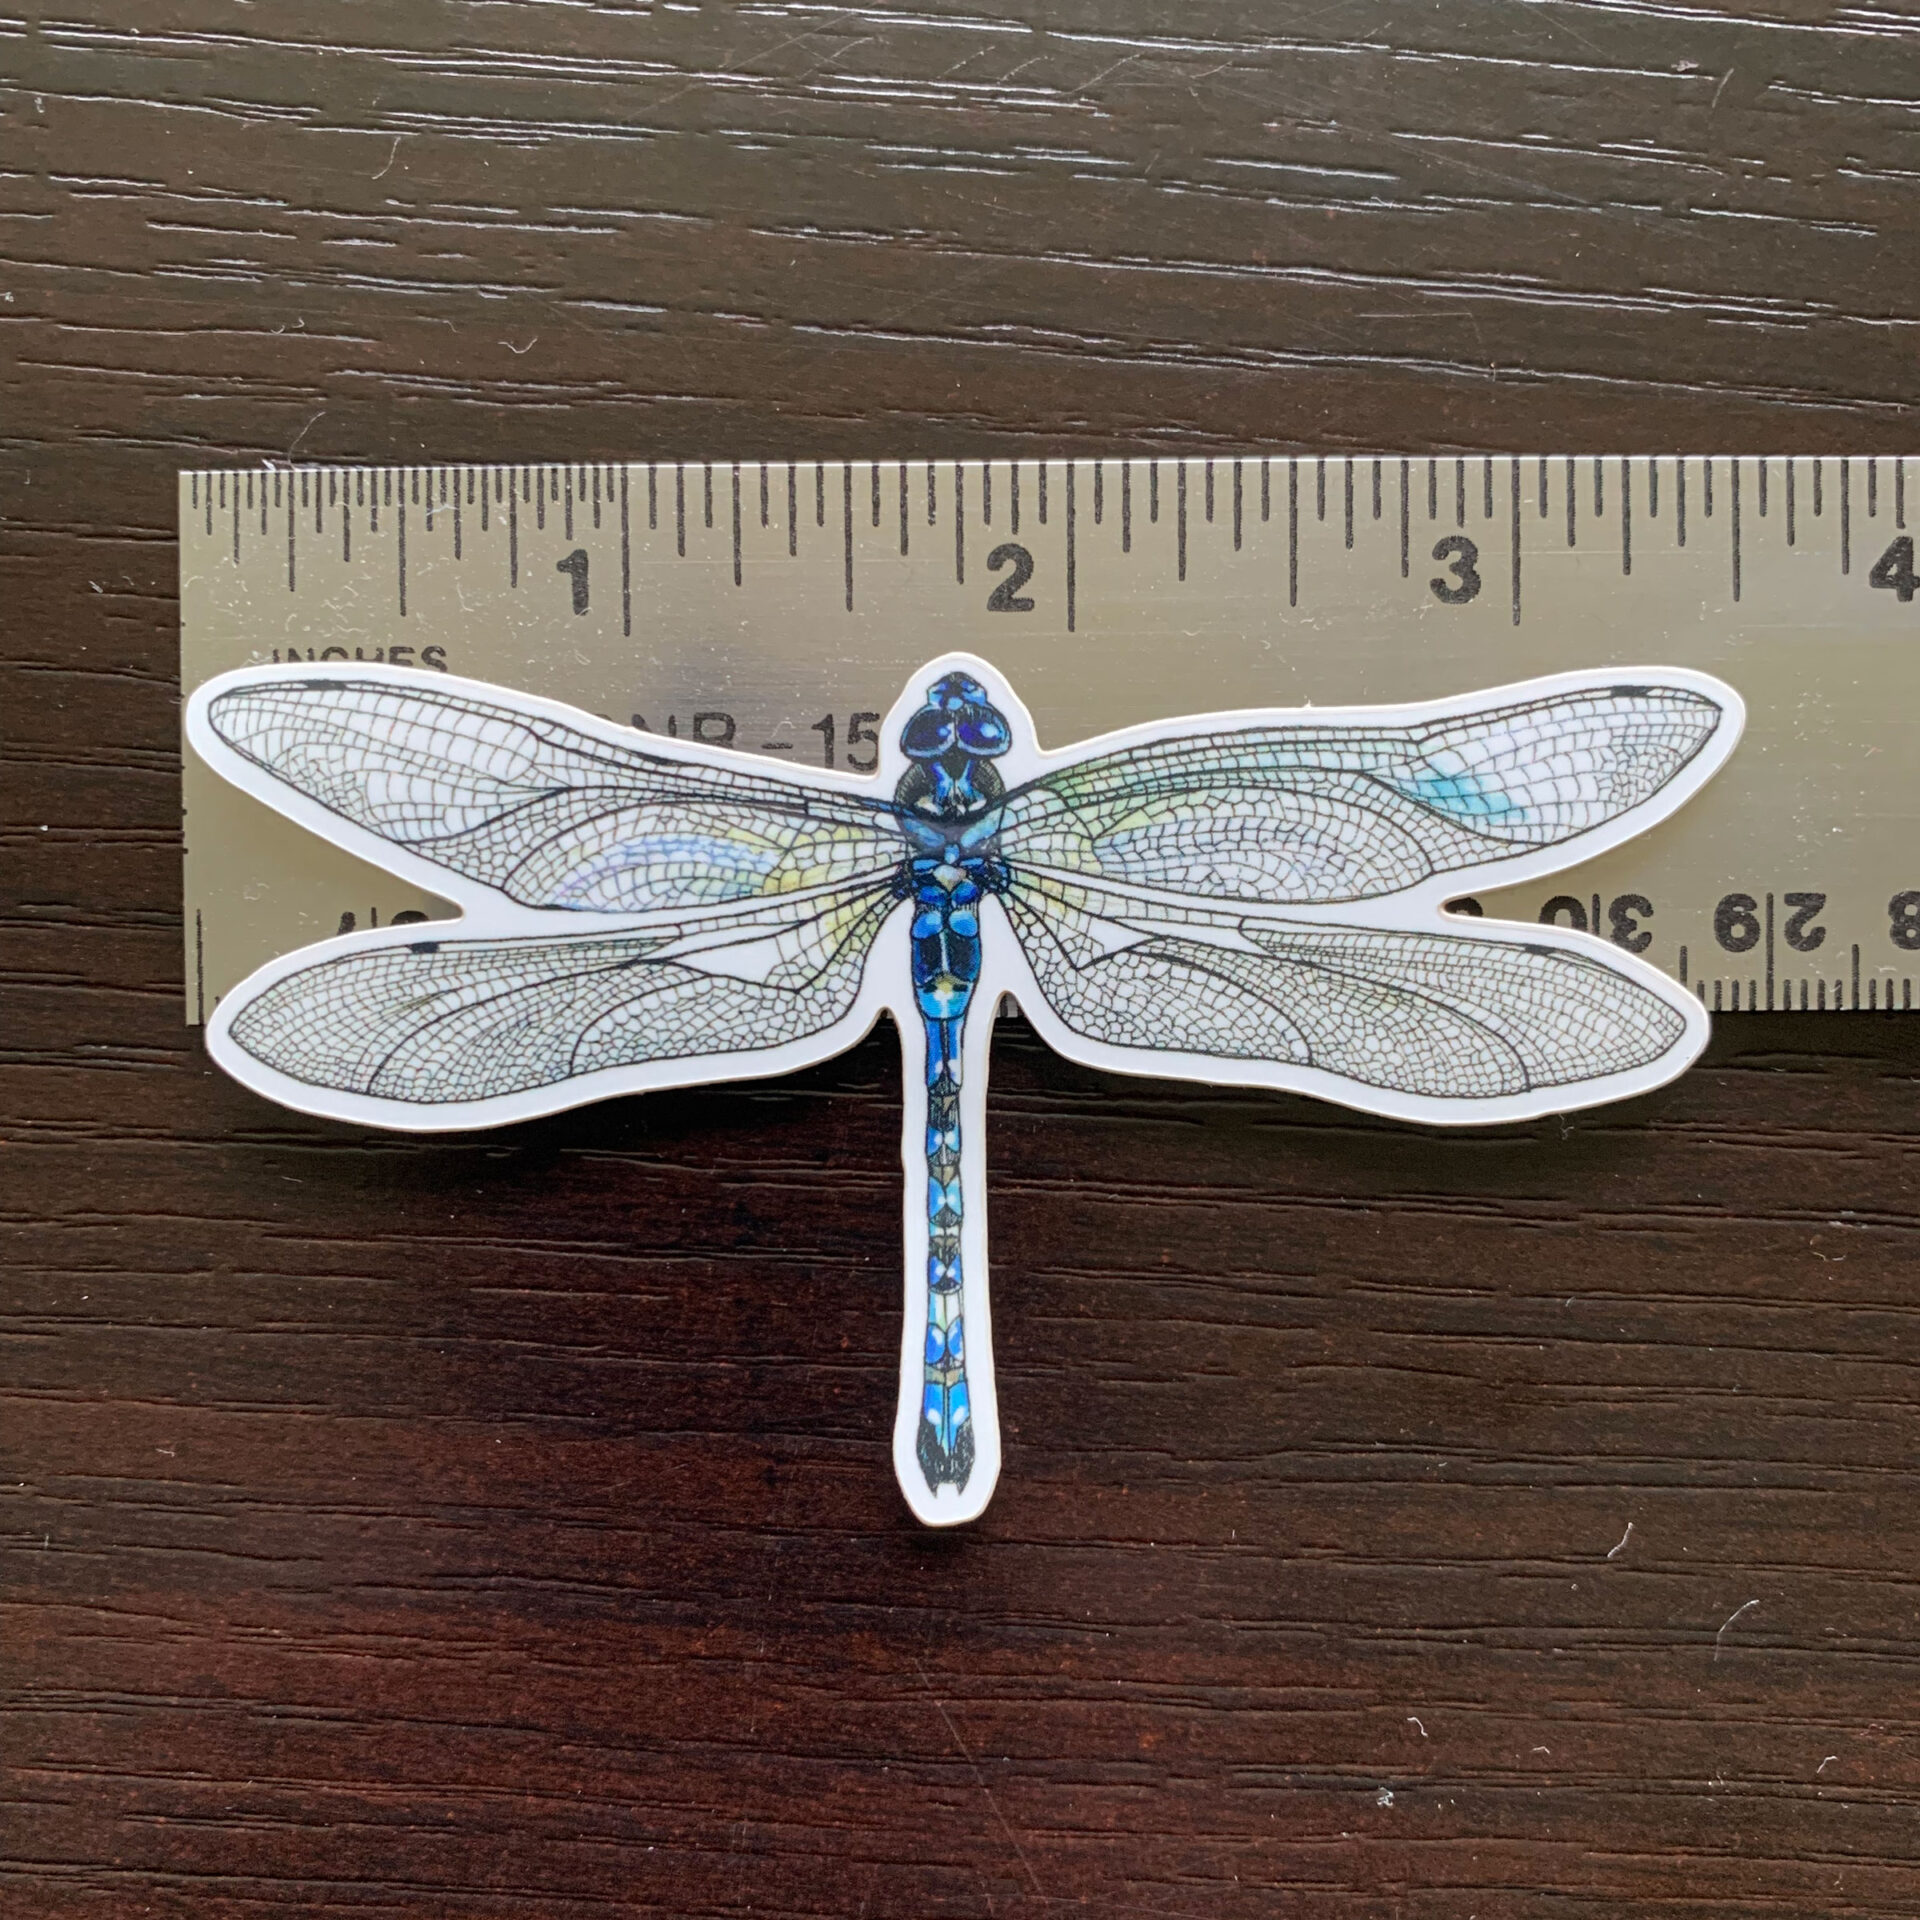 Dragonfly Hood Decals for Women, Vinyl Stickers Dragonfly by Artstudio54 